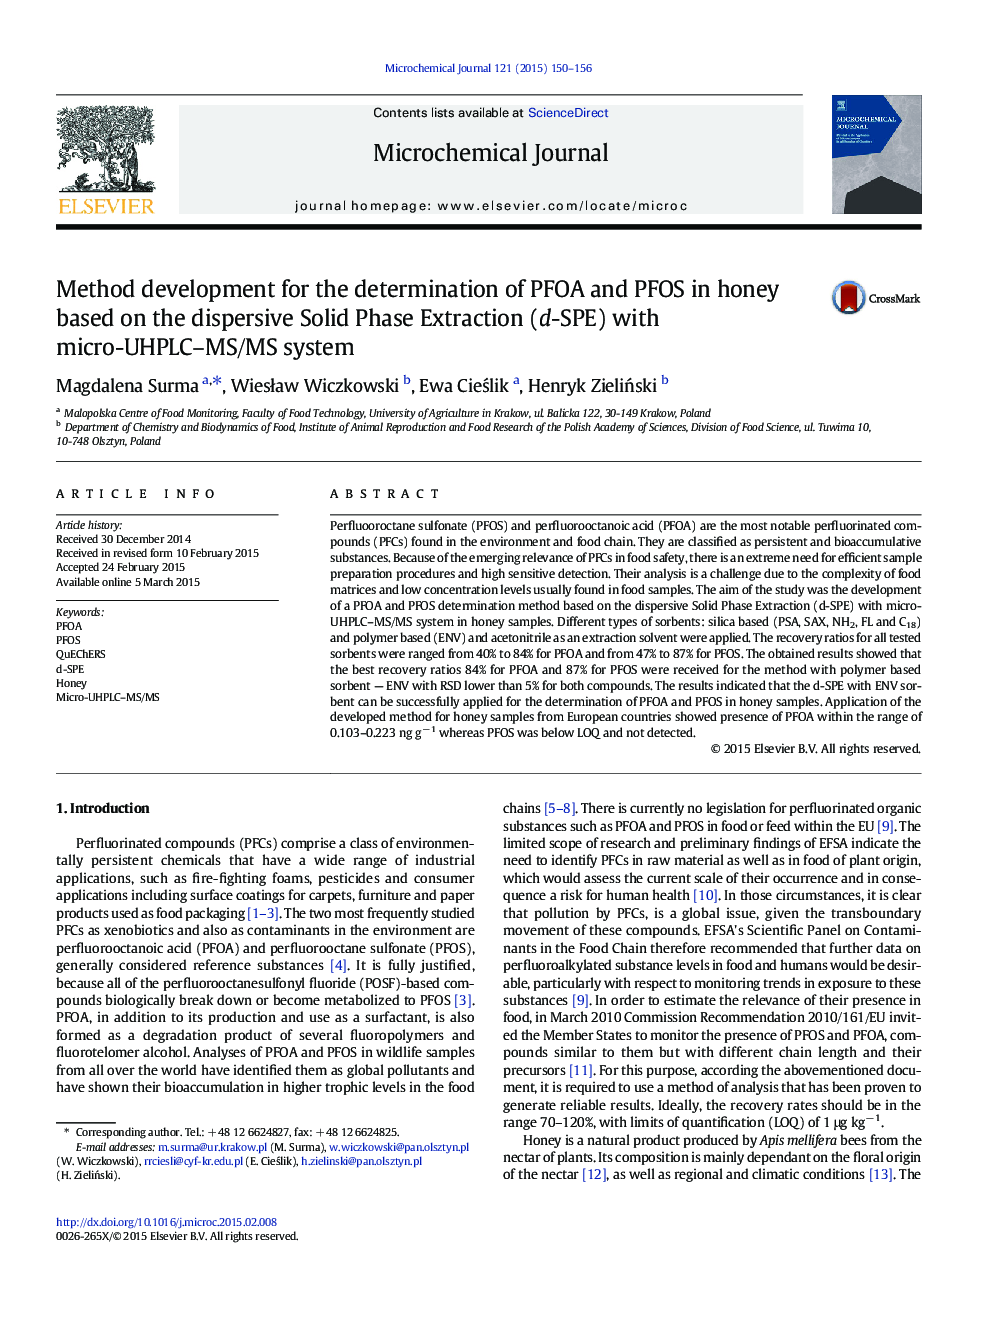 Method development for the determination of PFOA and PFOS in honey based on the dispersive Solid Phase Extraction (d-SPE) with micro-UHPLC–MS/MS system